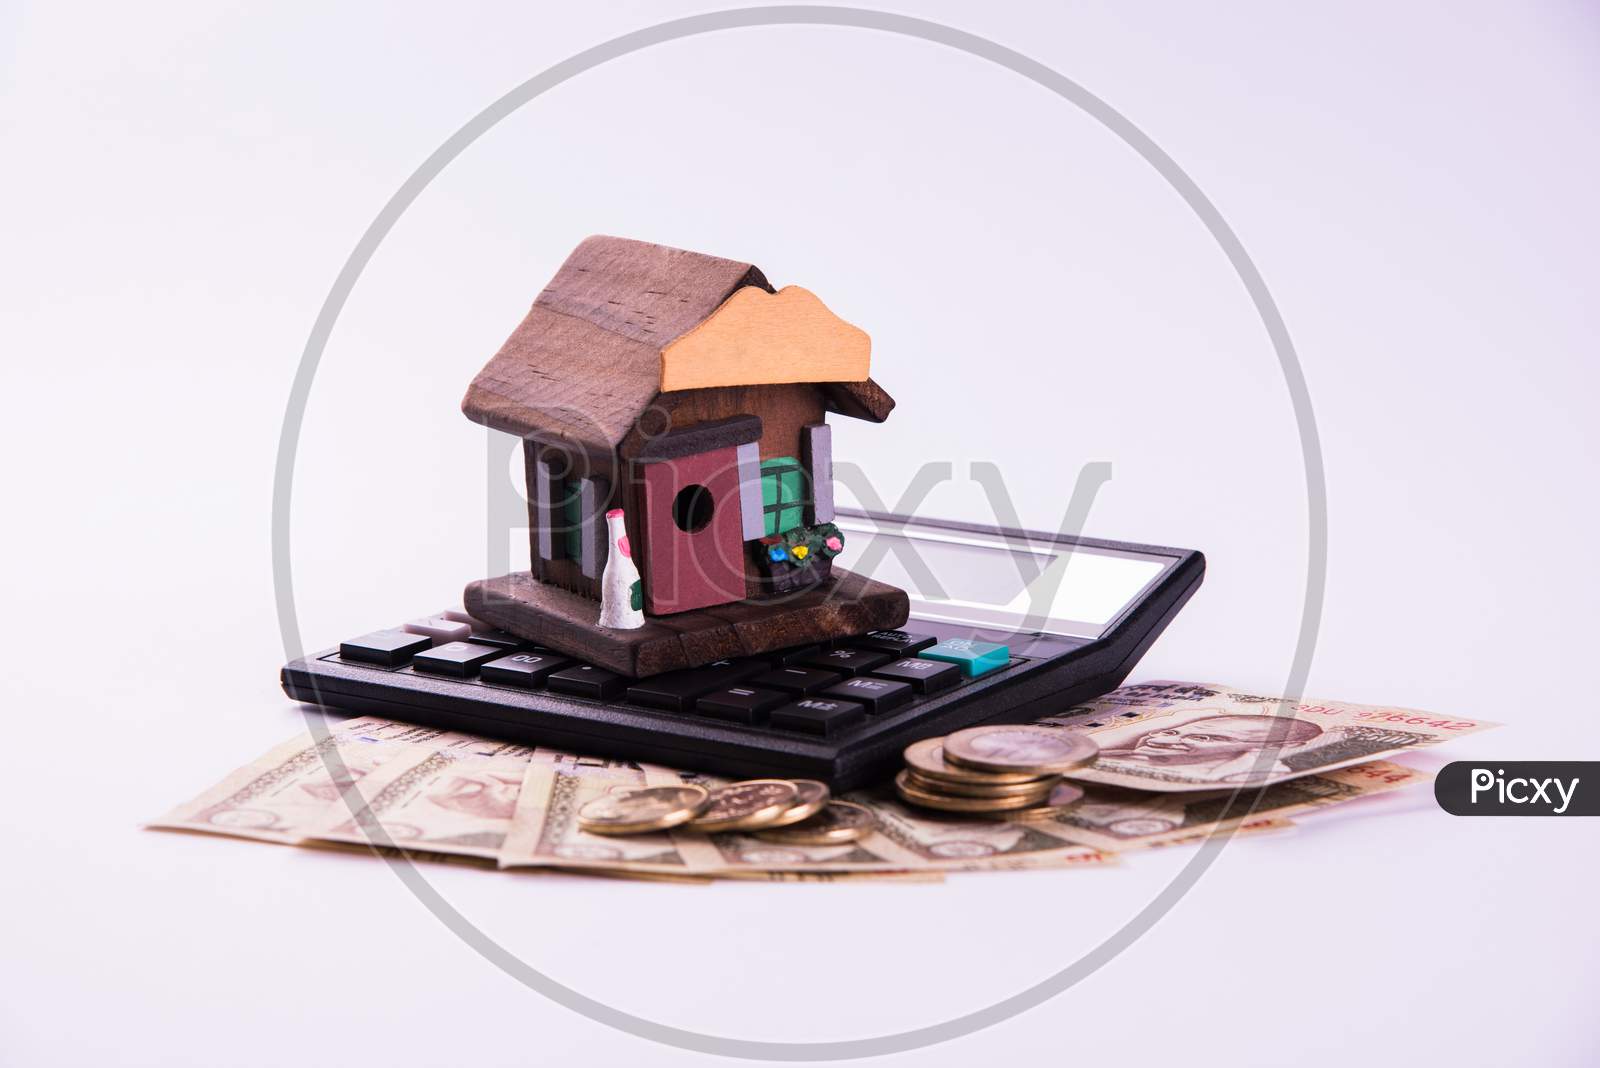 Indian Real Estate Finance and Housing Loan or buying concept showing Rupees, 3D house model, calculator etc